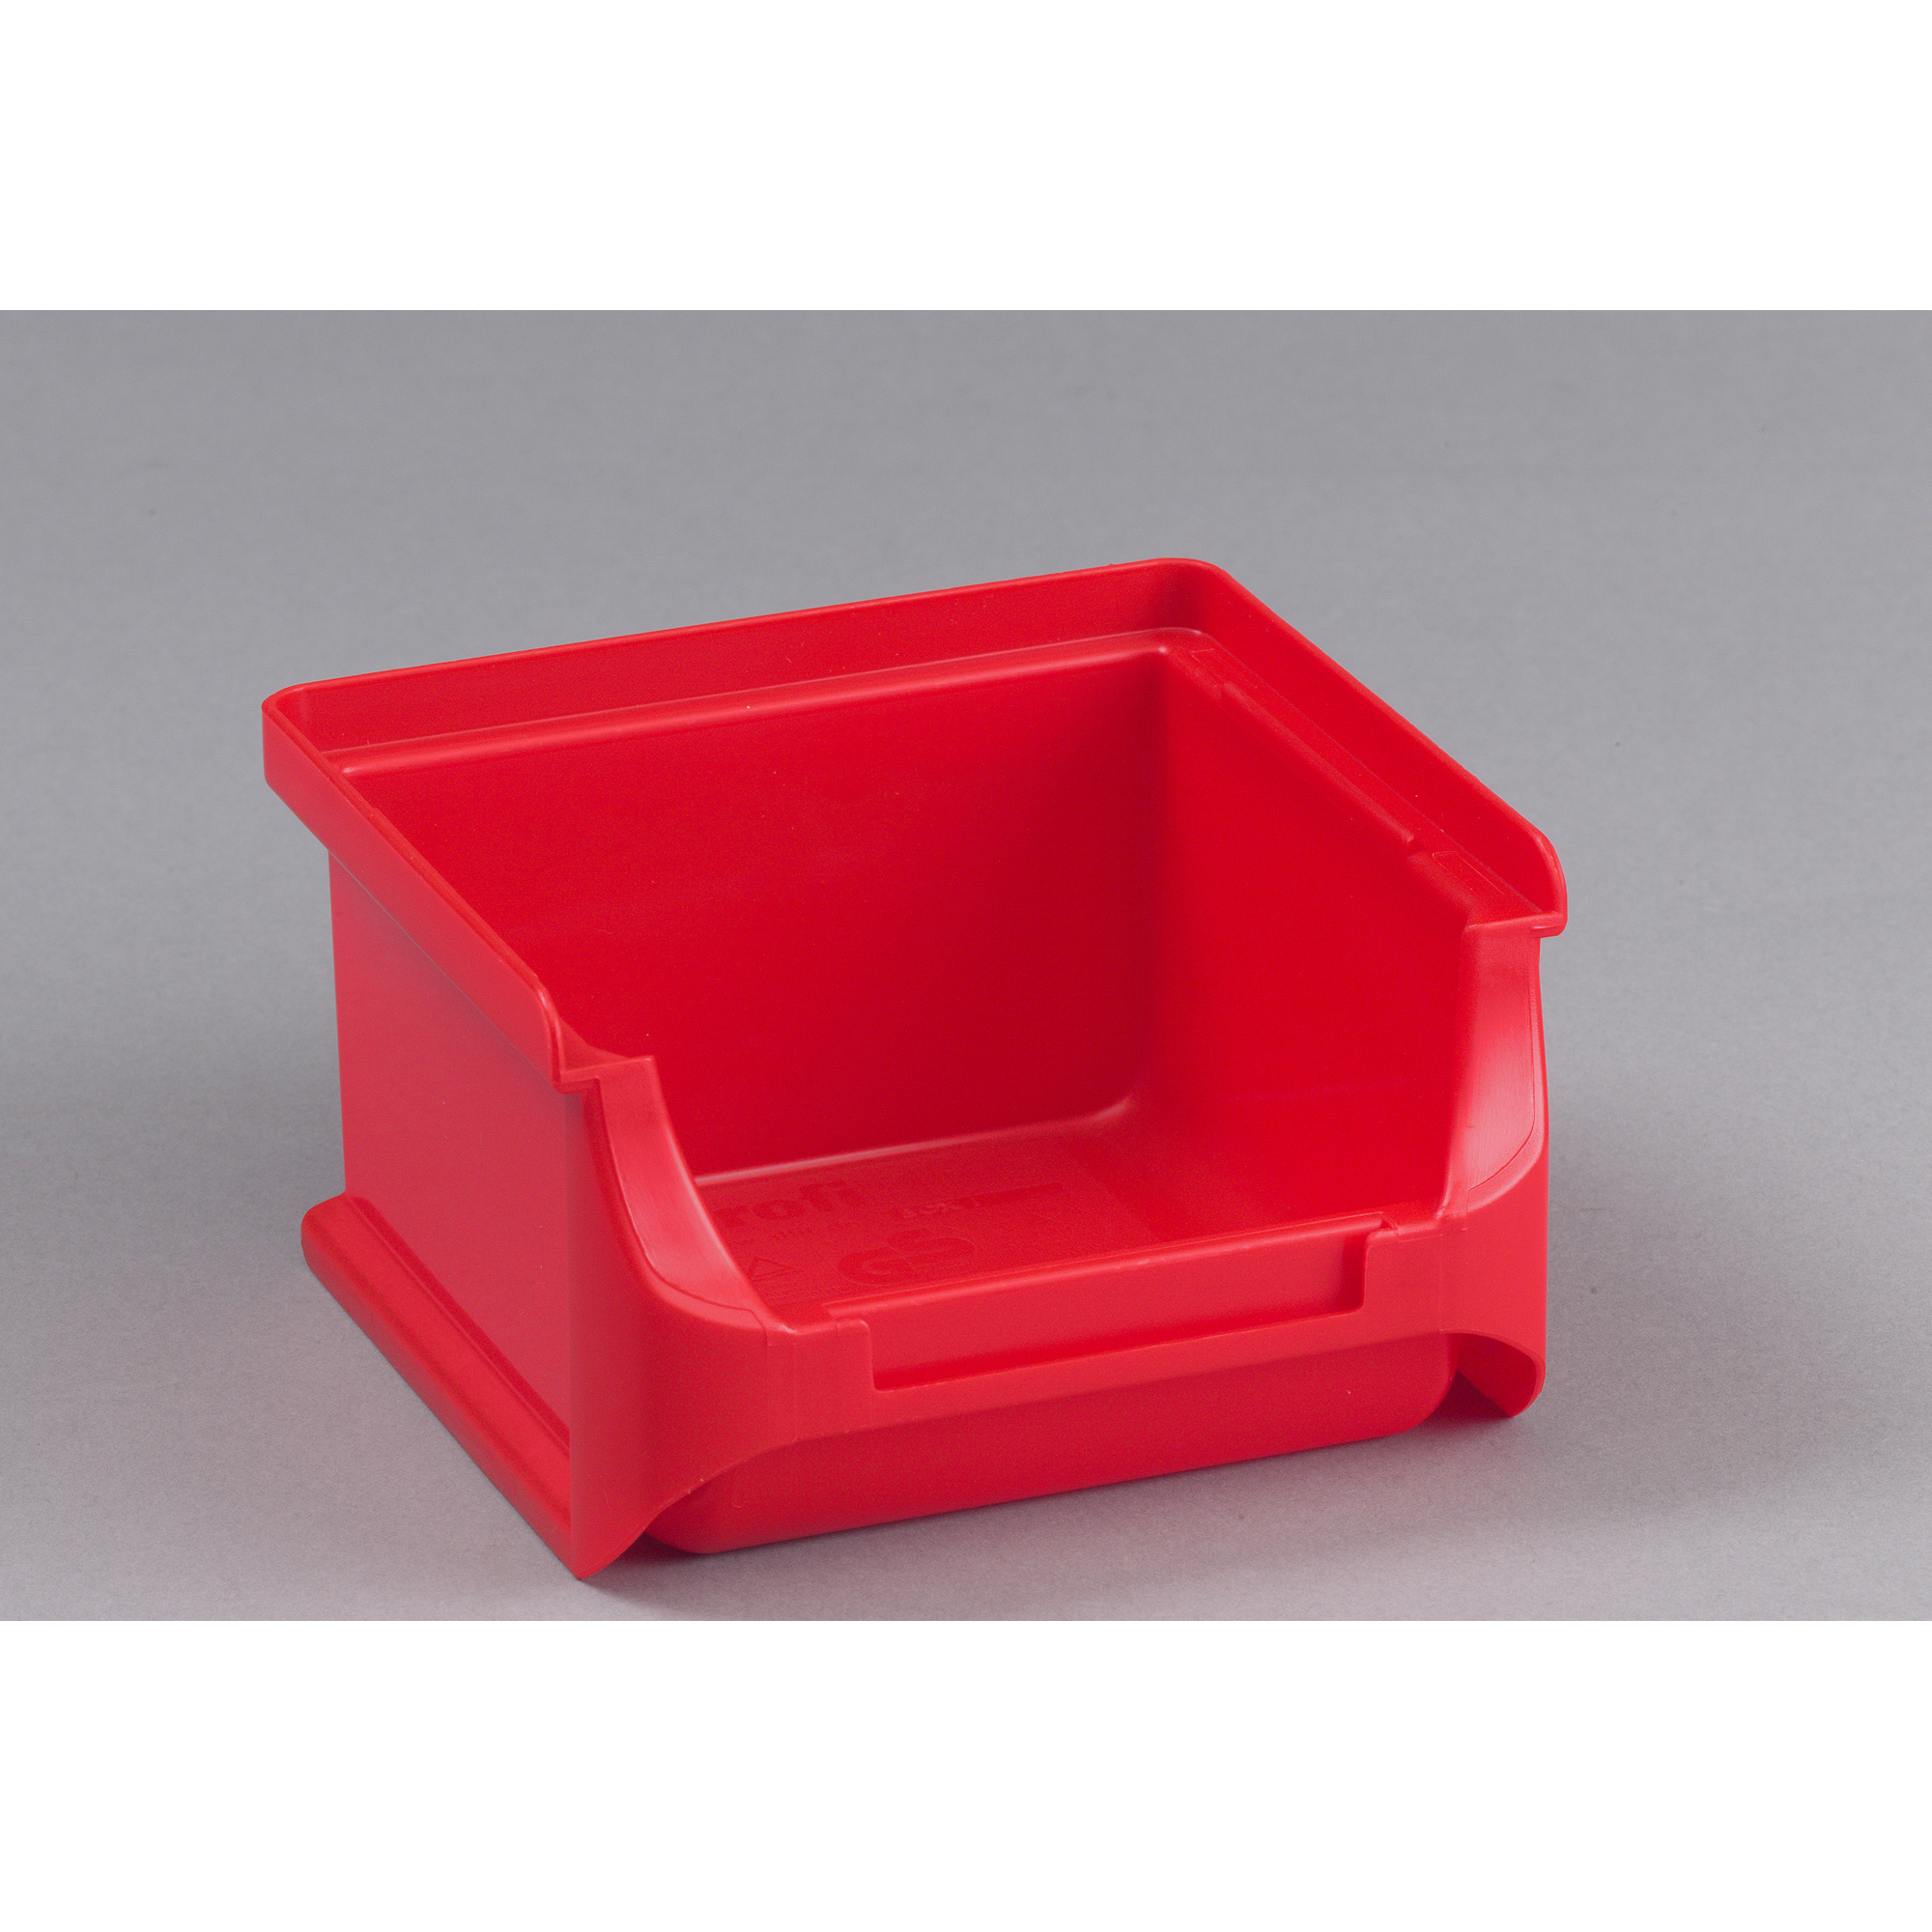 ProfiPlus Stapelsichtbox 'Box 1' rot 10,2 x 10 x 6 cm + product picture